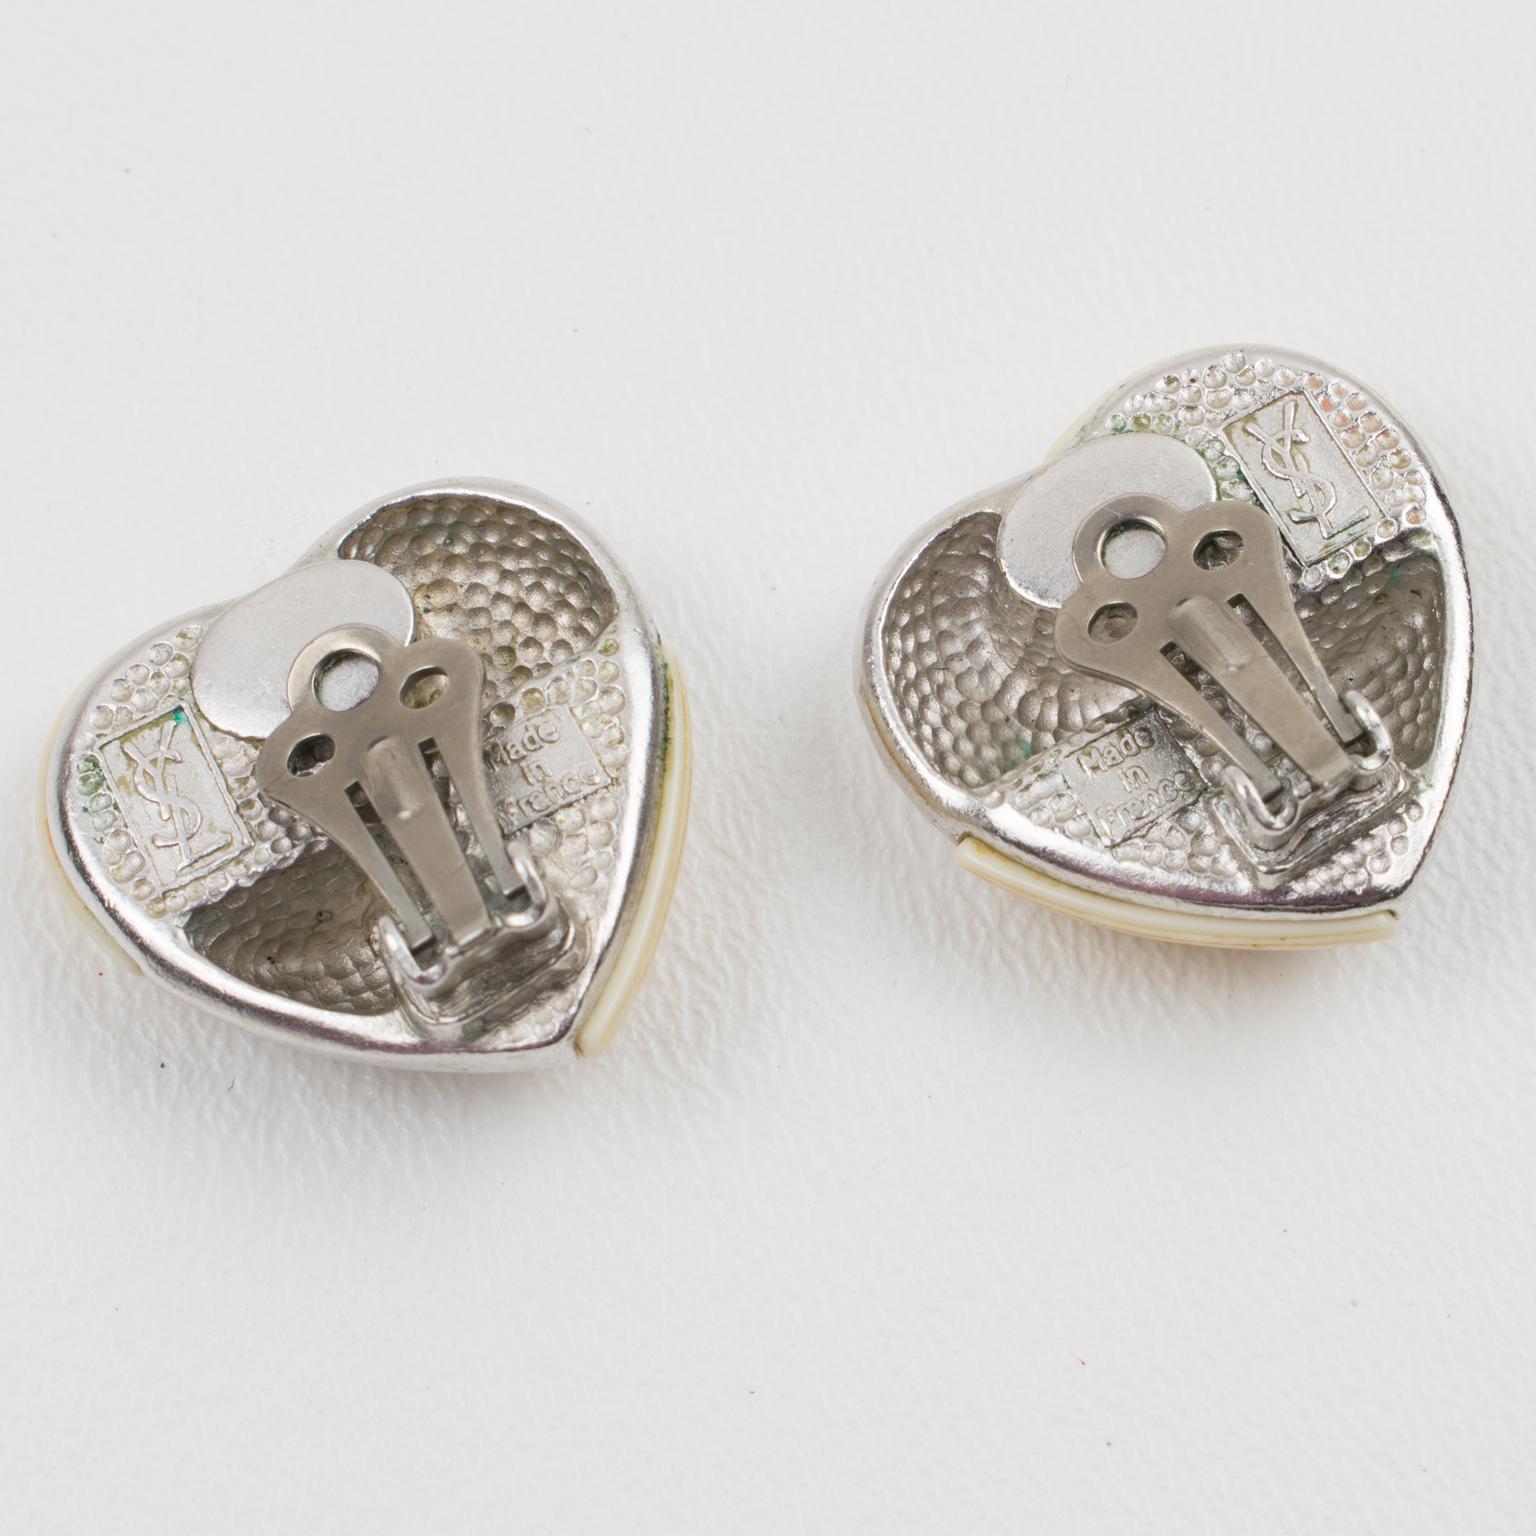 Yves Saint Laurent Paris Clip Earrings Silver and Resin Heart In Excellent Condition For Sale In Atlanta, GA